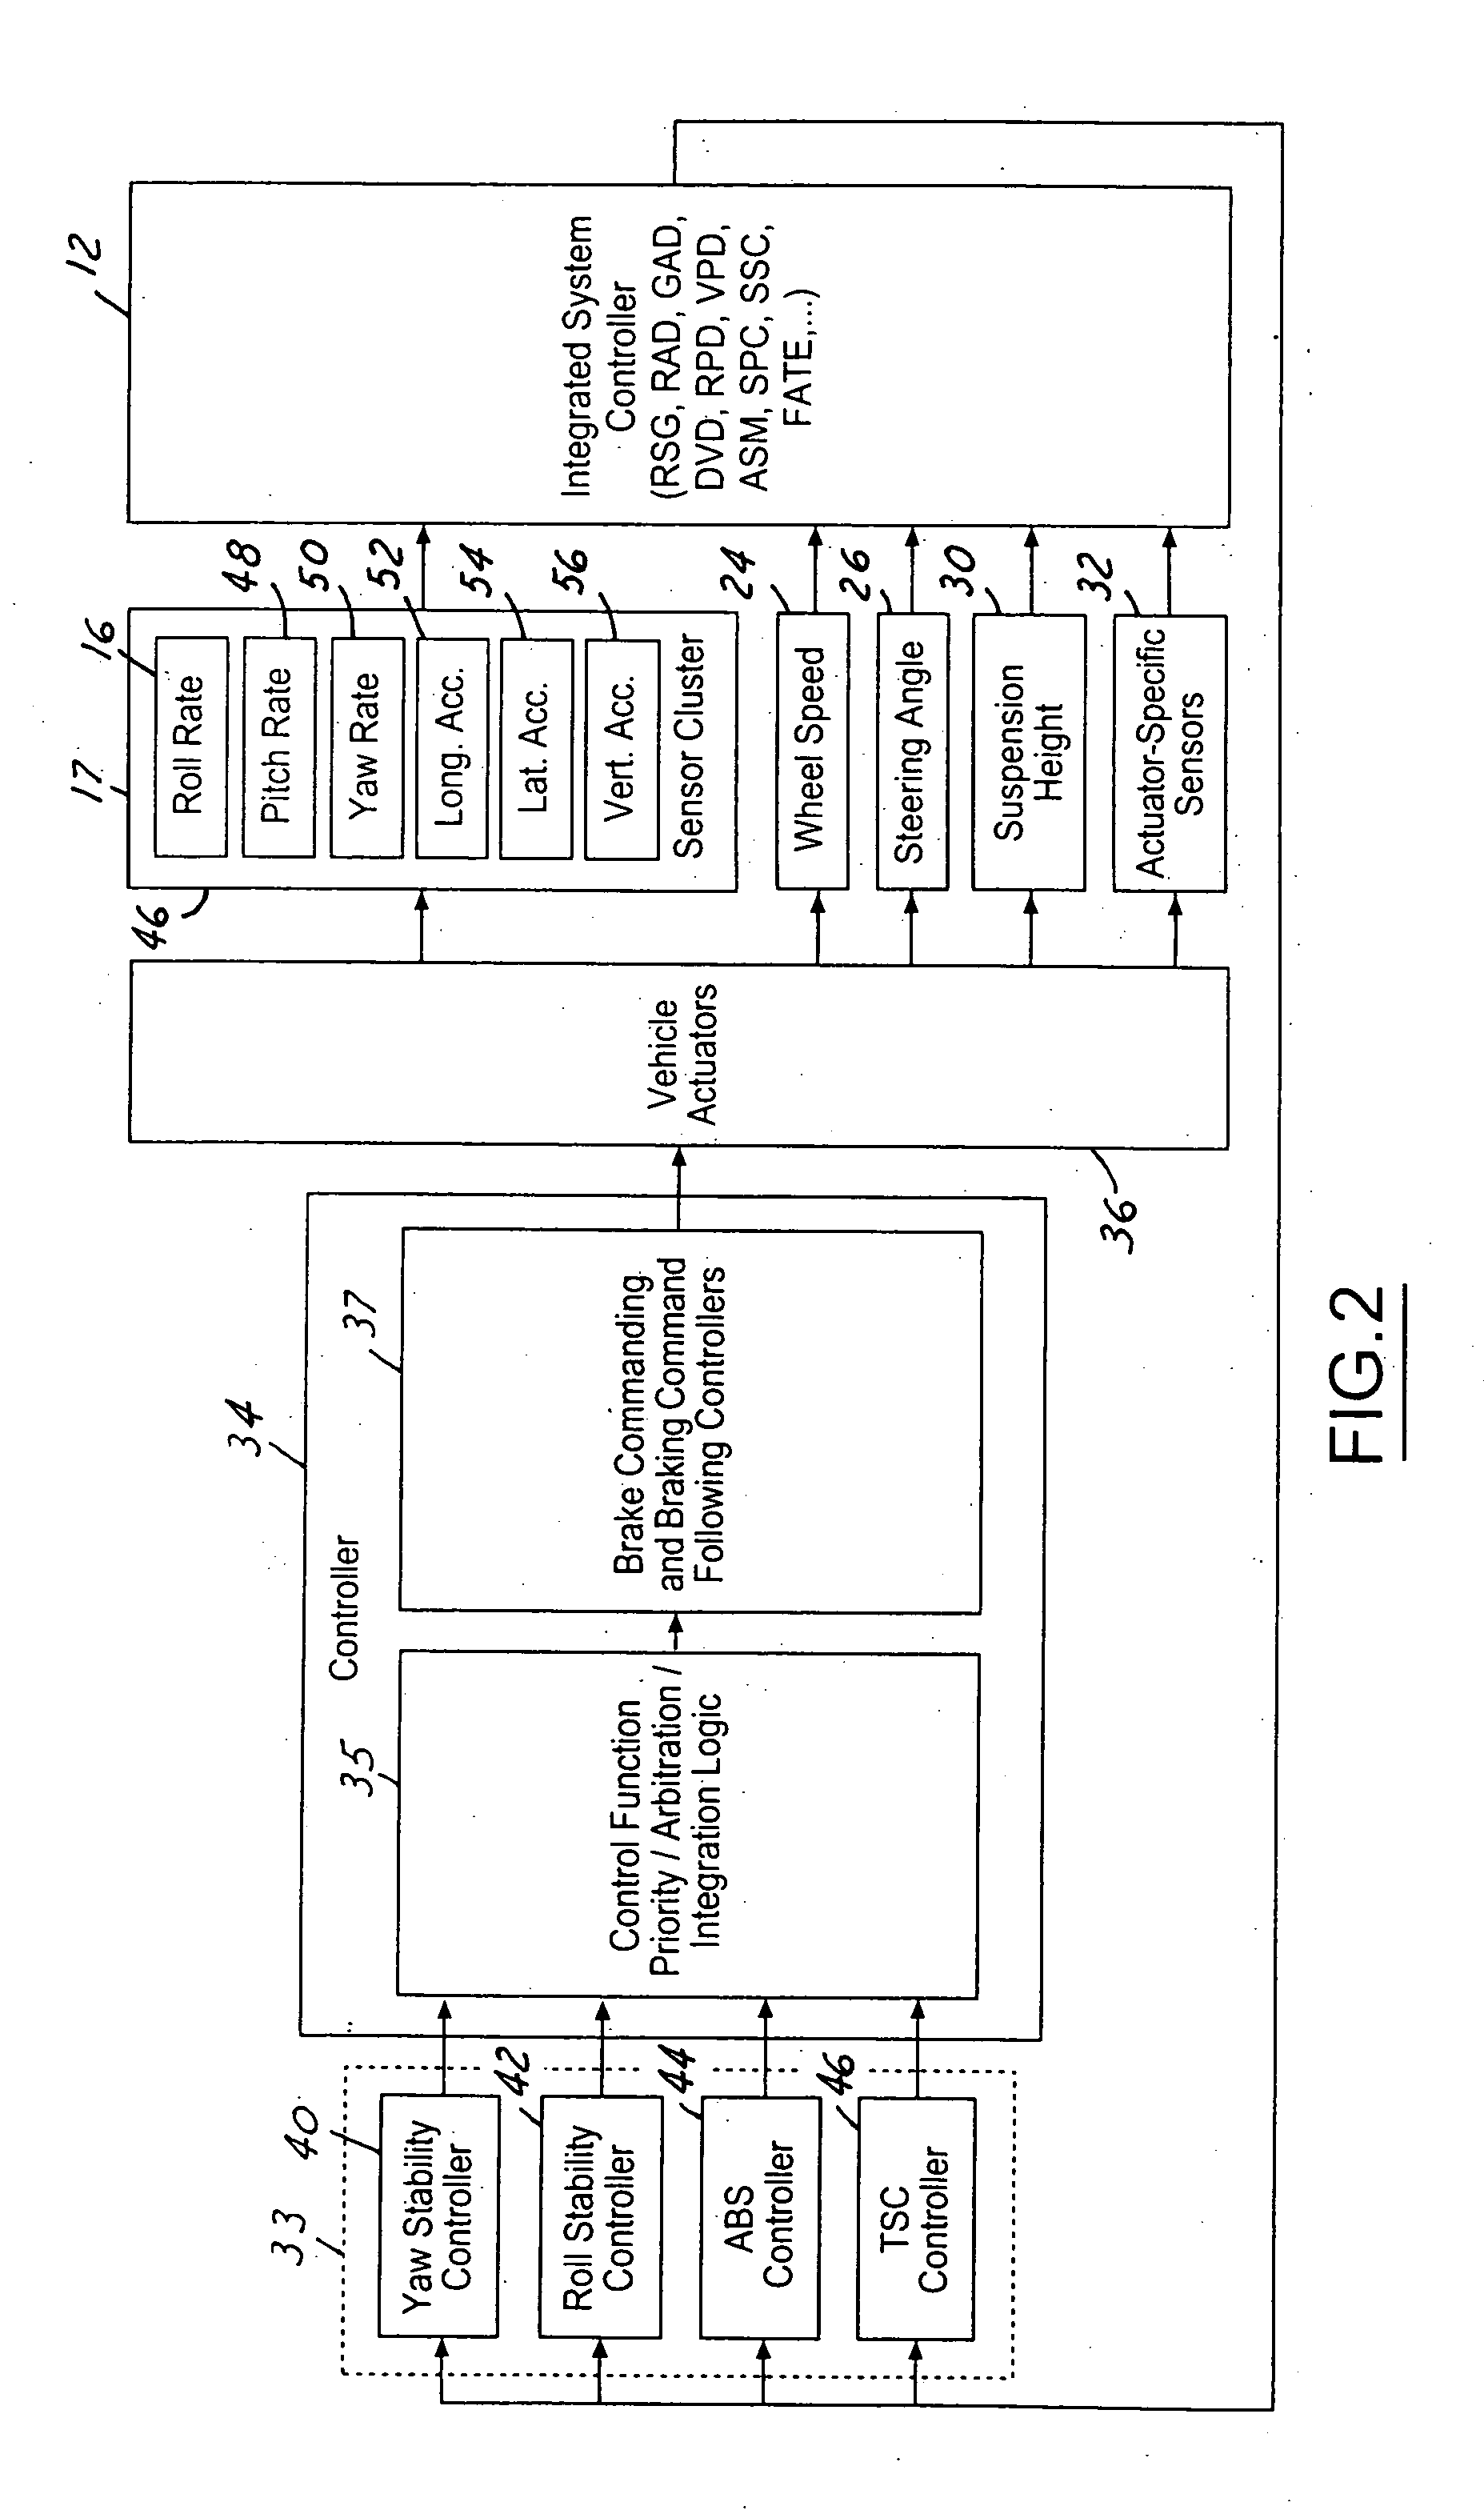 Reference signal generator for an integrated sensing system